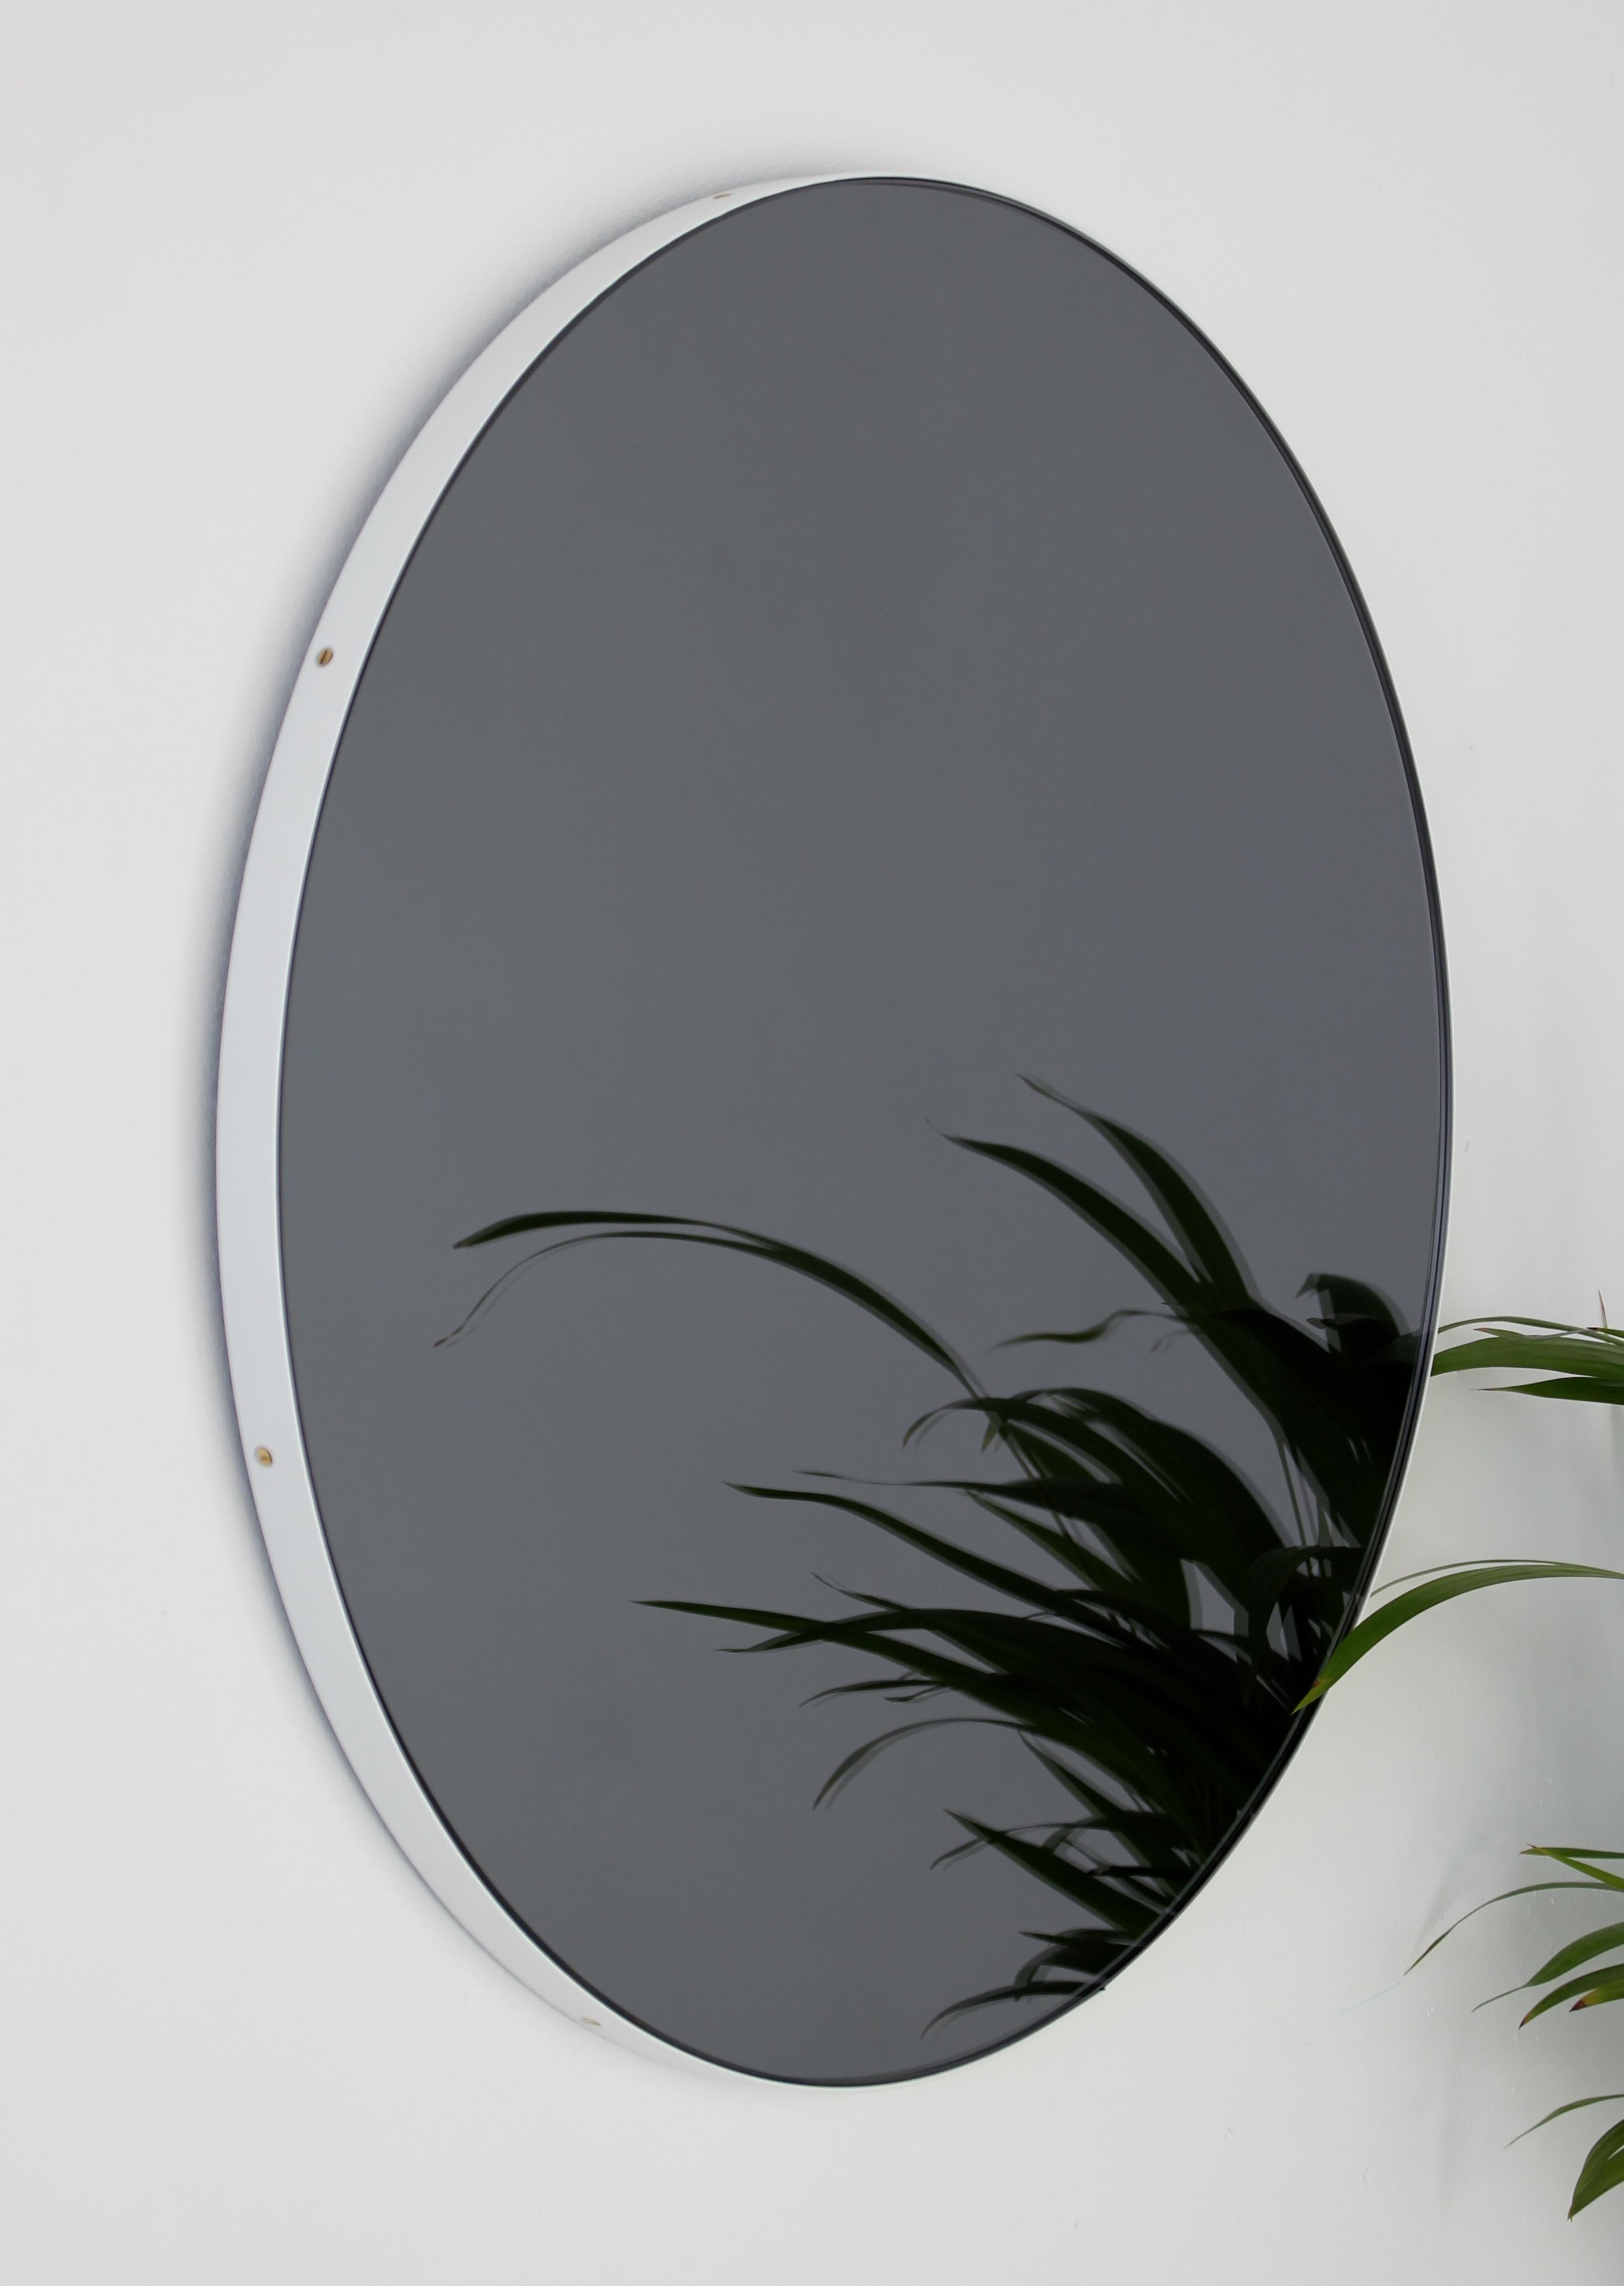 Contemporary black tinted round mirror with a smart white powder coated aluminium frame. Designed and handcrafted in London, UK.

Fitted with a brass hook or an aluminium z-bar depending on the size of the mirror. Also available on demand with a